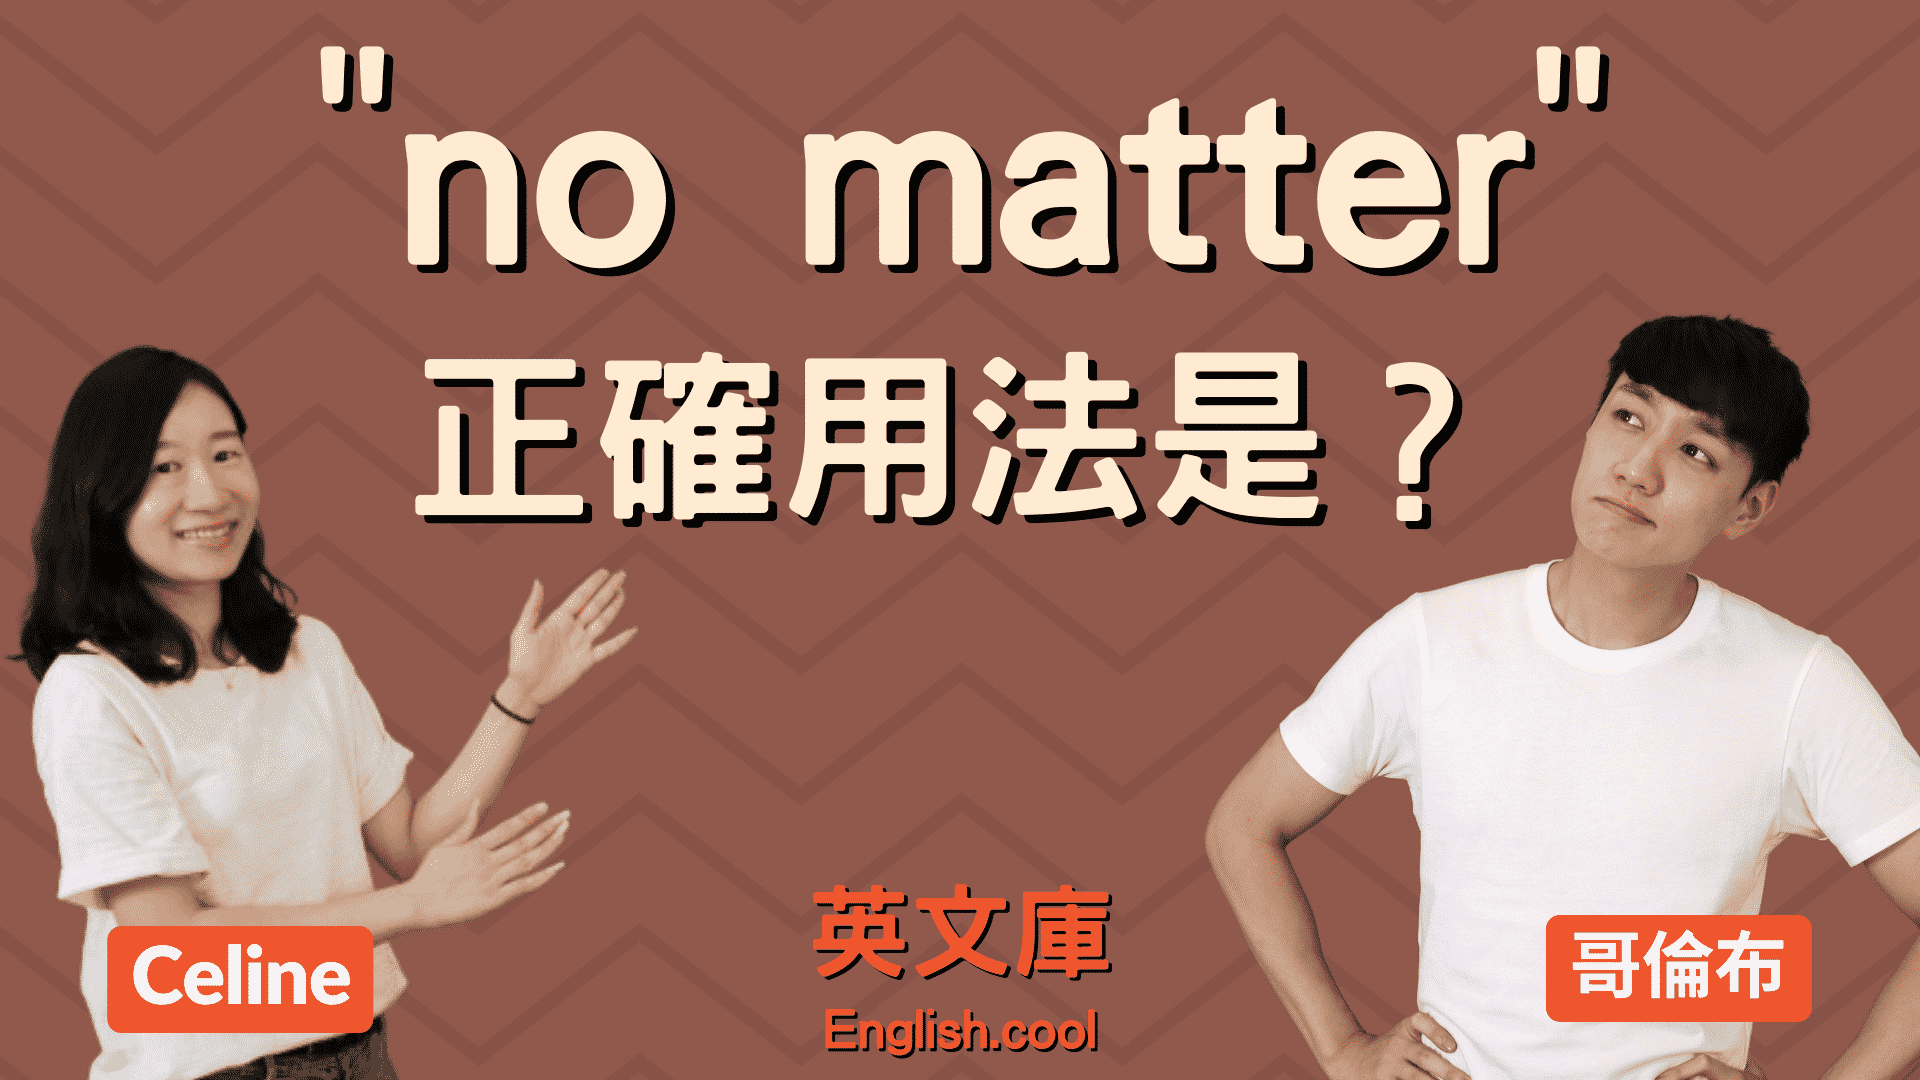 You are currently viewing 「no matter」正確用法是？來看例句一次搞懂！